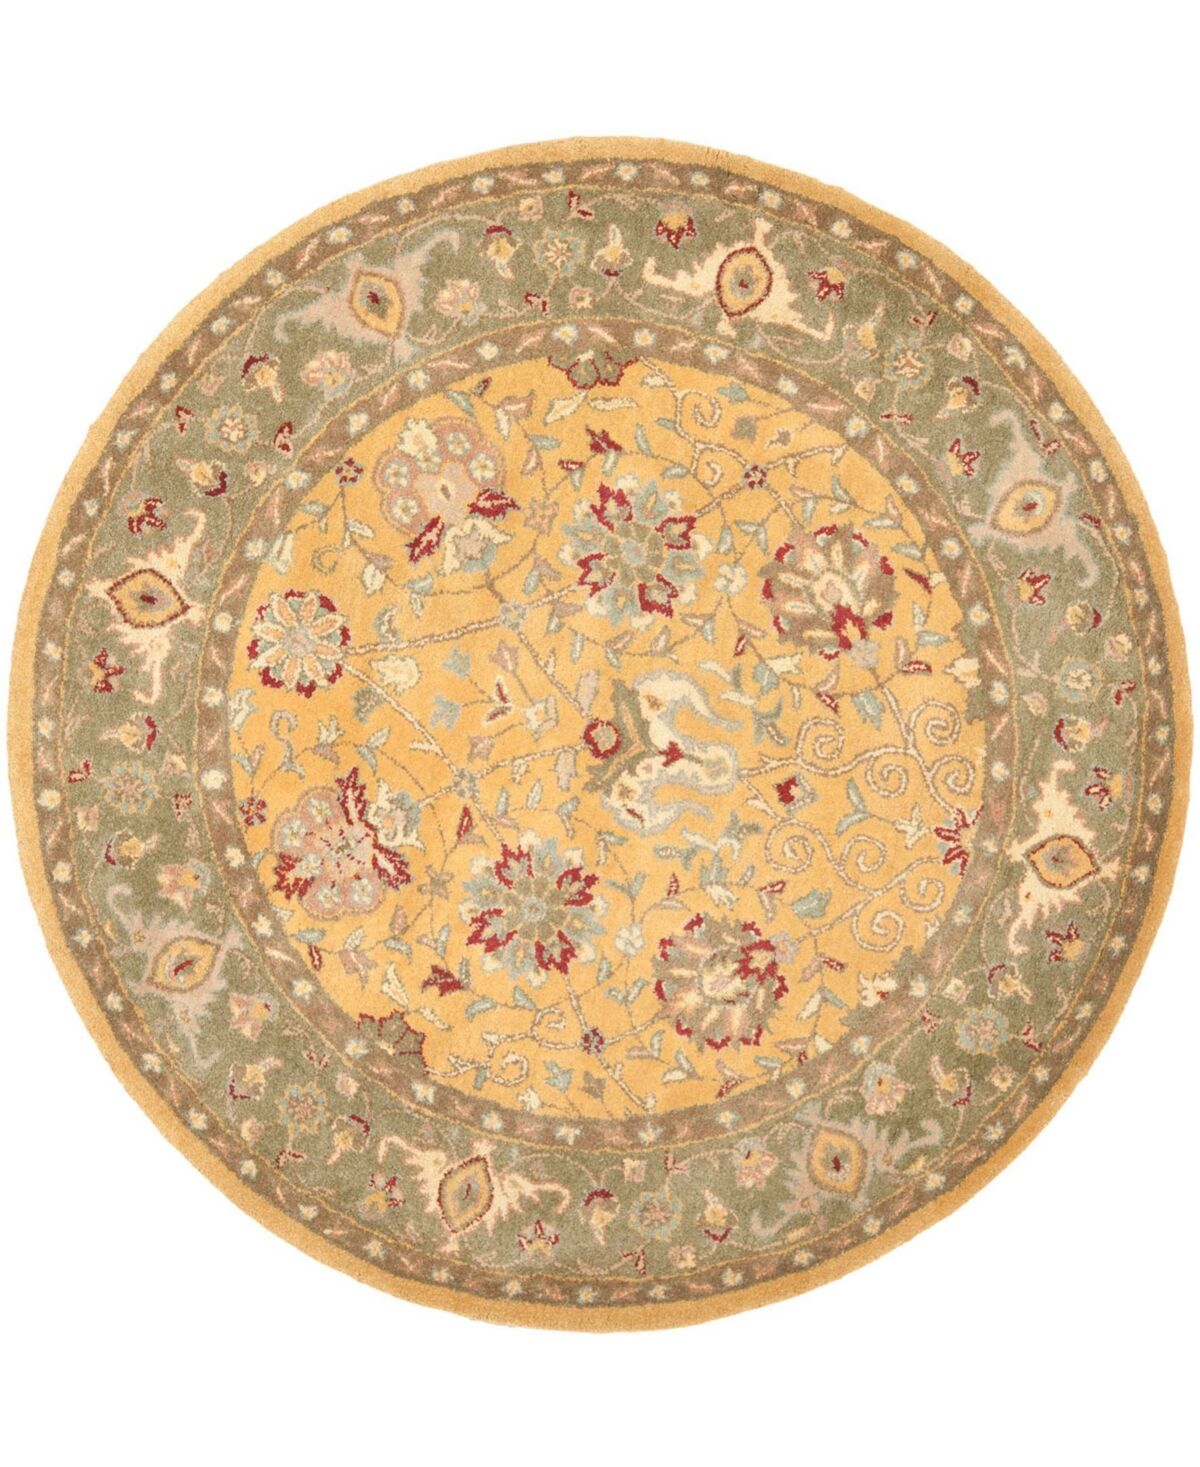 Safavieh Antiquity At21 Gold 6' x 6' Round Area Rug - Gold